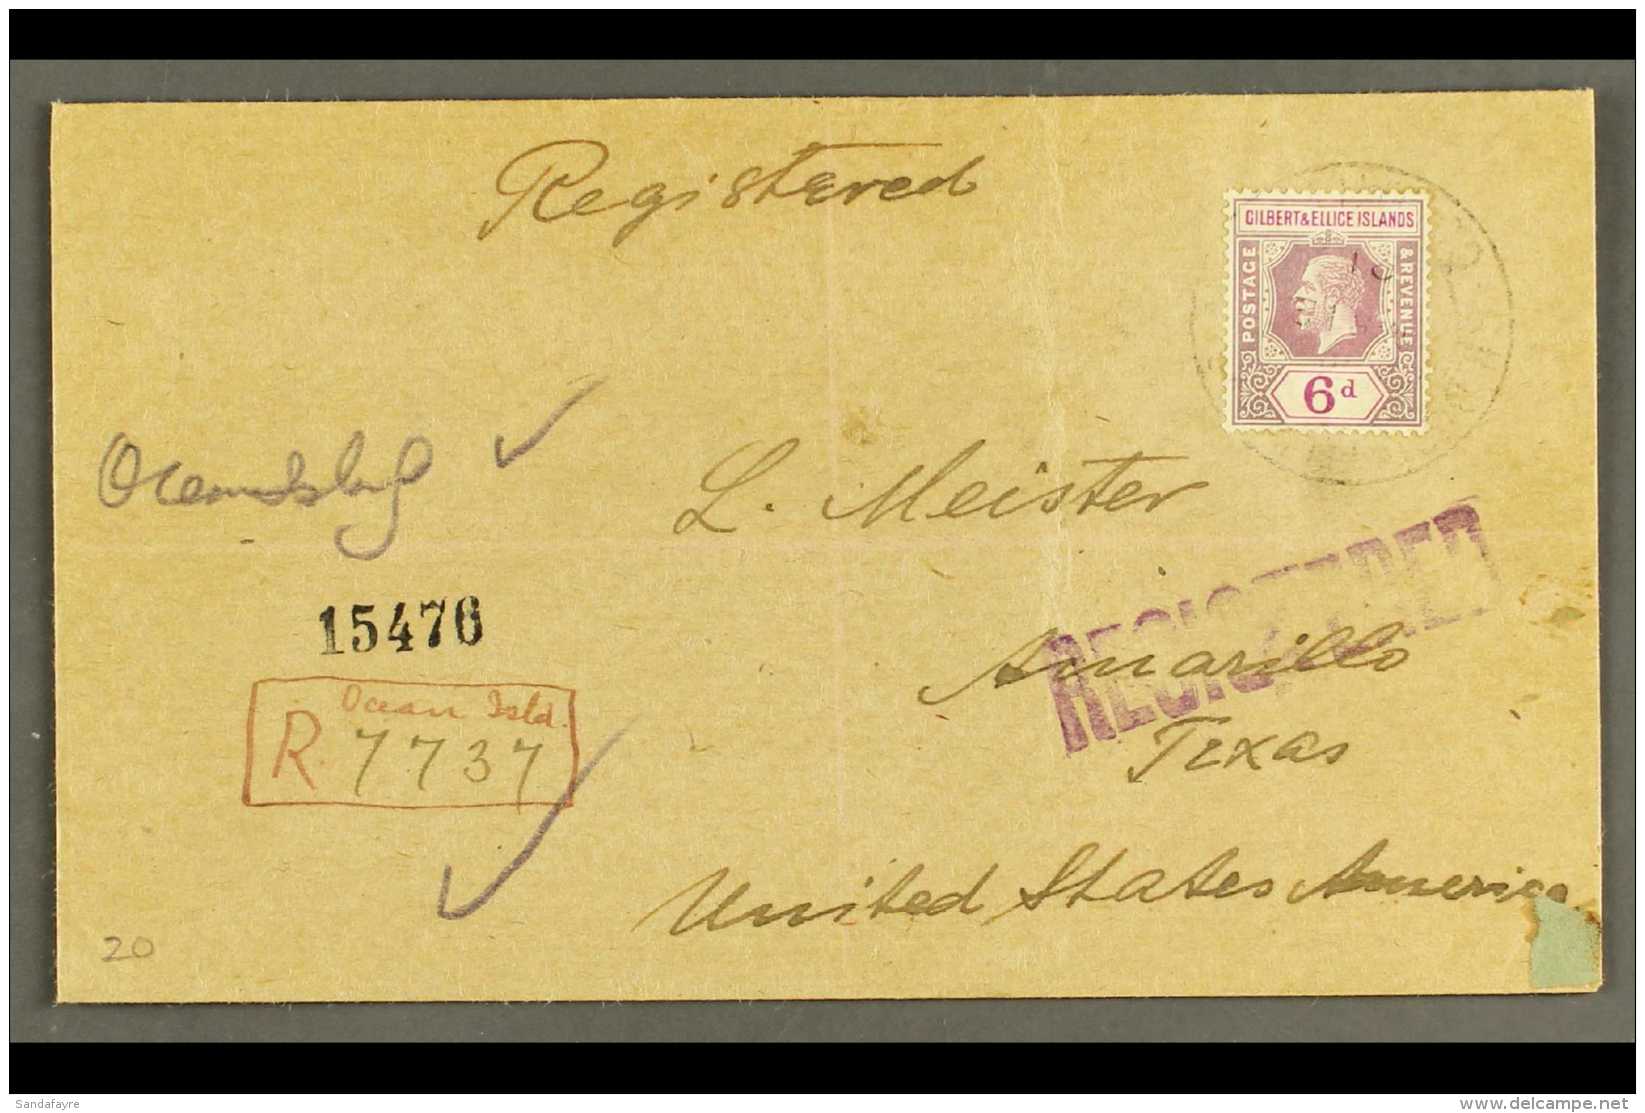 OCEAN ISLAND 1924 Registered Cover To USA, Bearing KGV 6d, Cancelled By "G.P.O. Ocean Isld." Pmk, With Hand... - Gilbert- En Ellice-eilanden (...-1979)